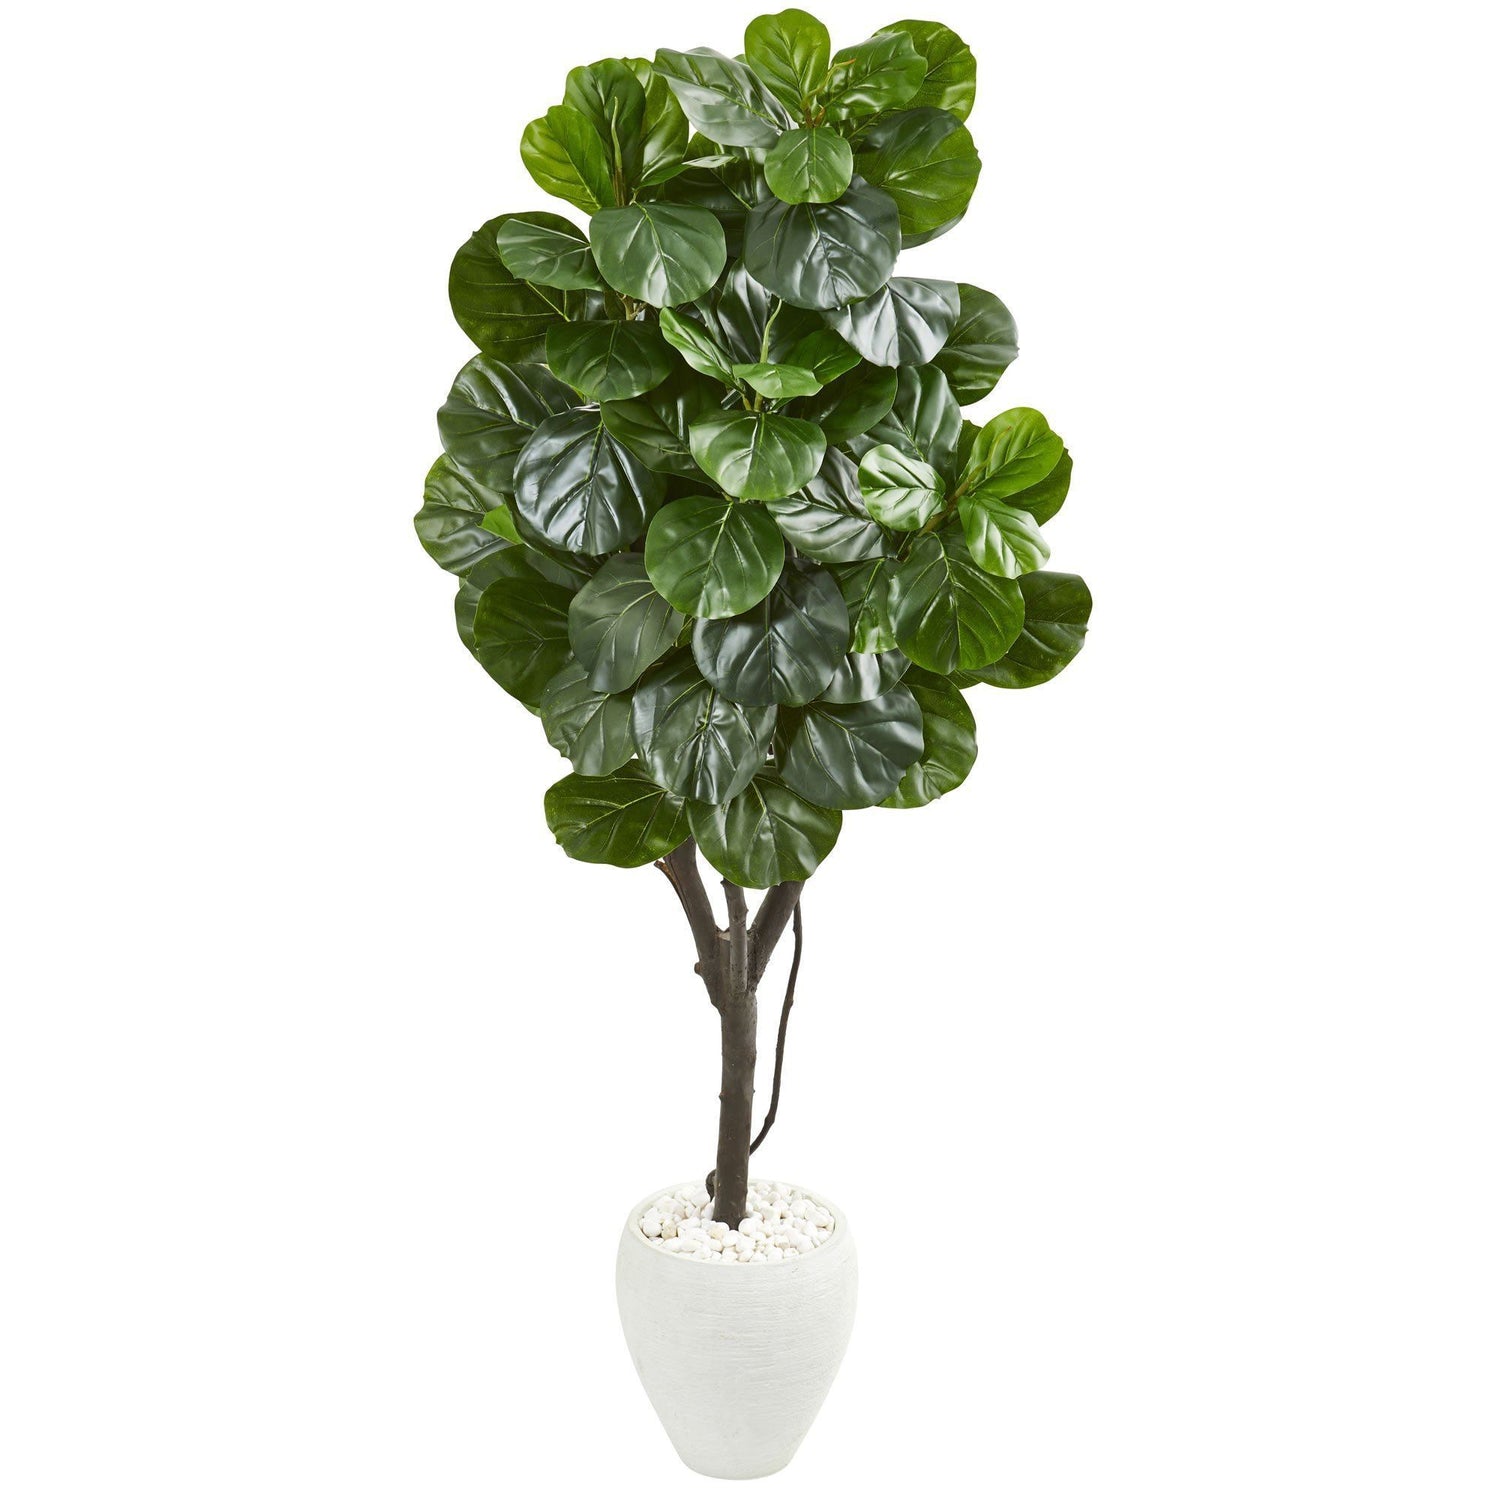 68” Fiddle Leaf Fig Artificial Tree in White Planter